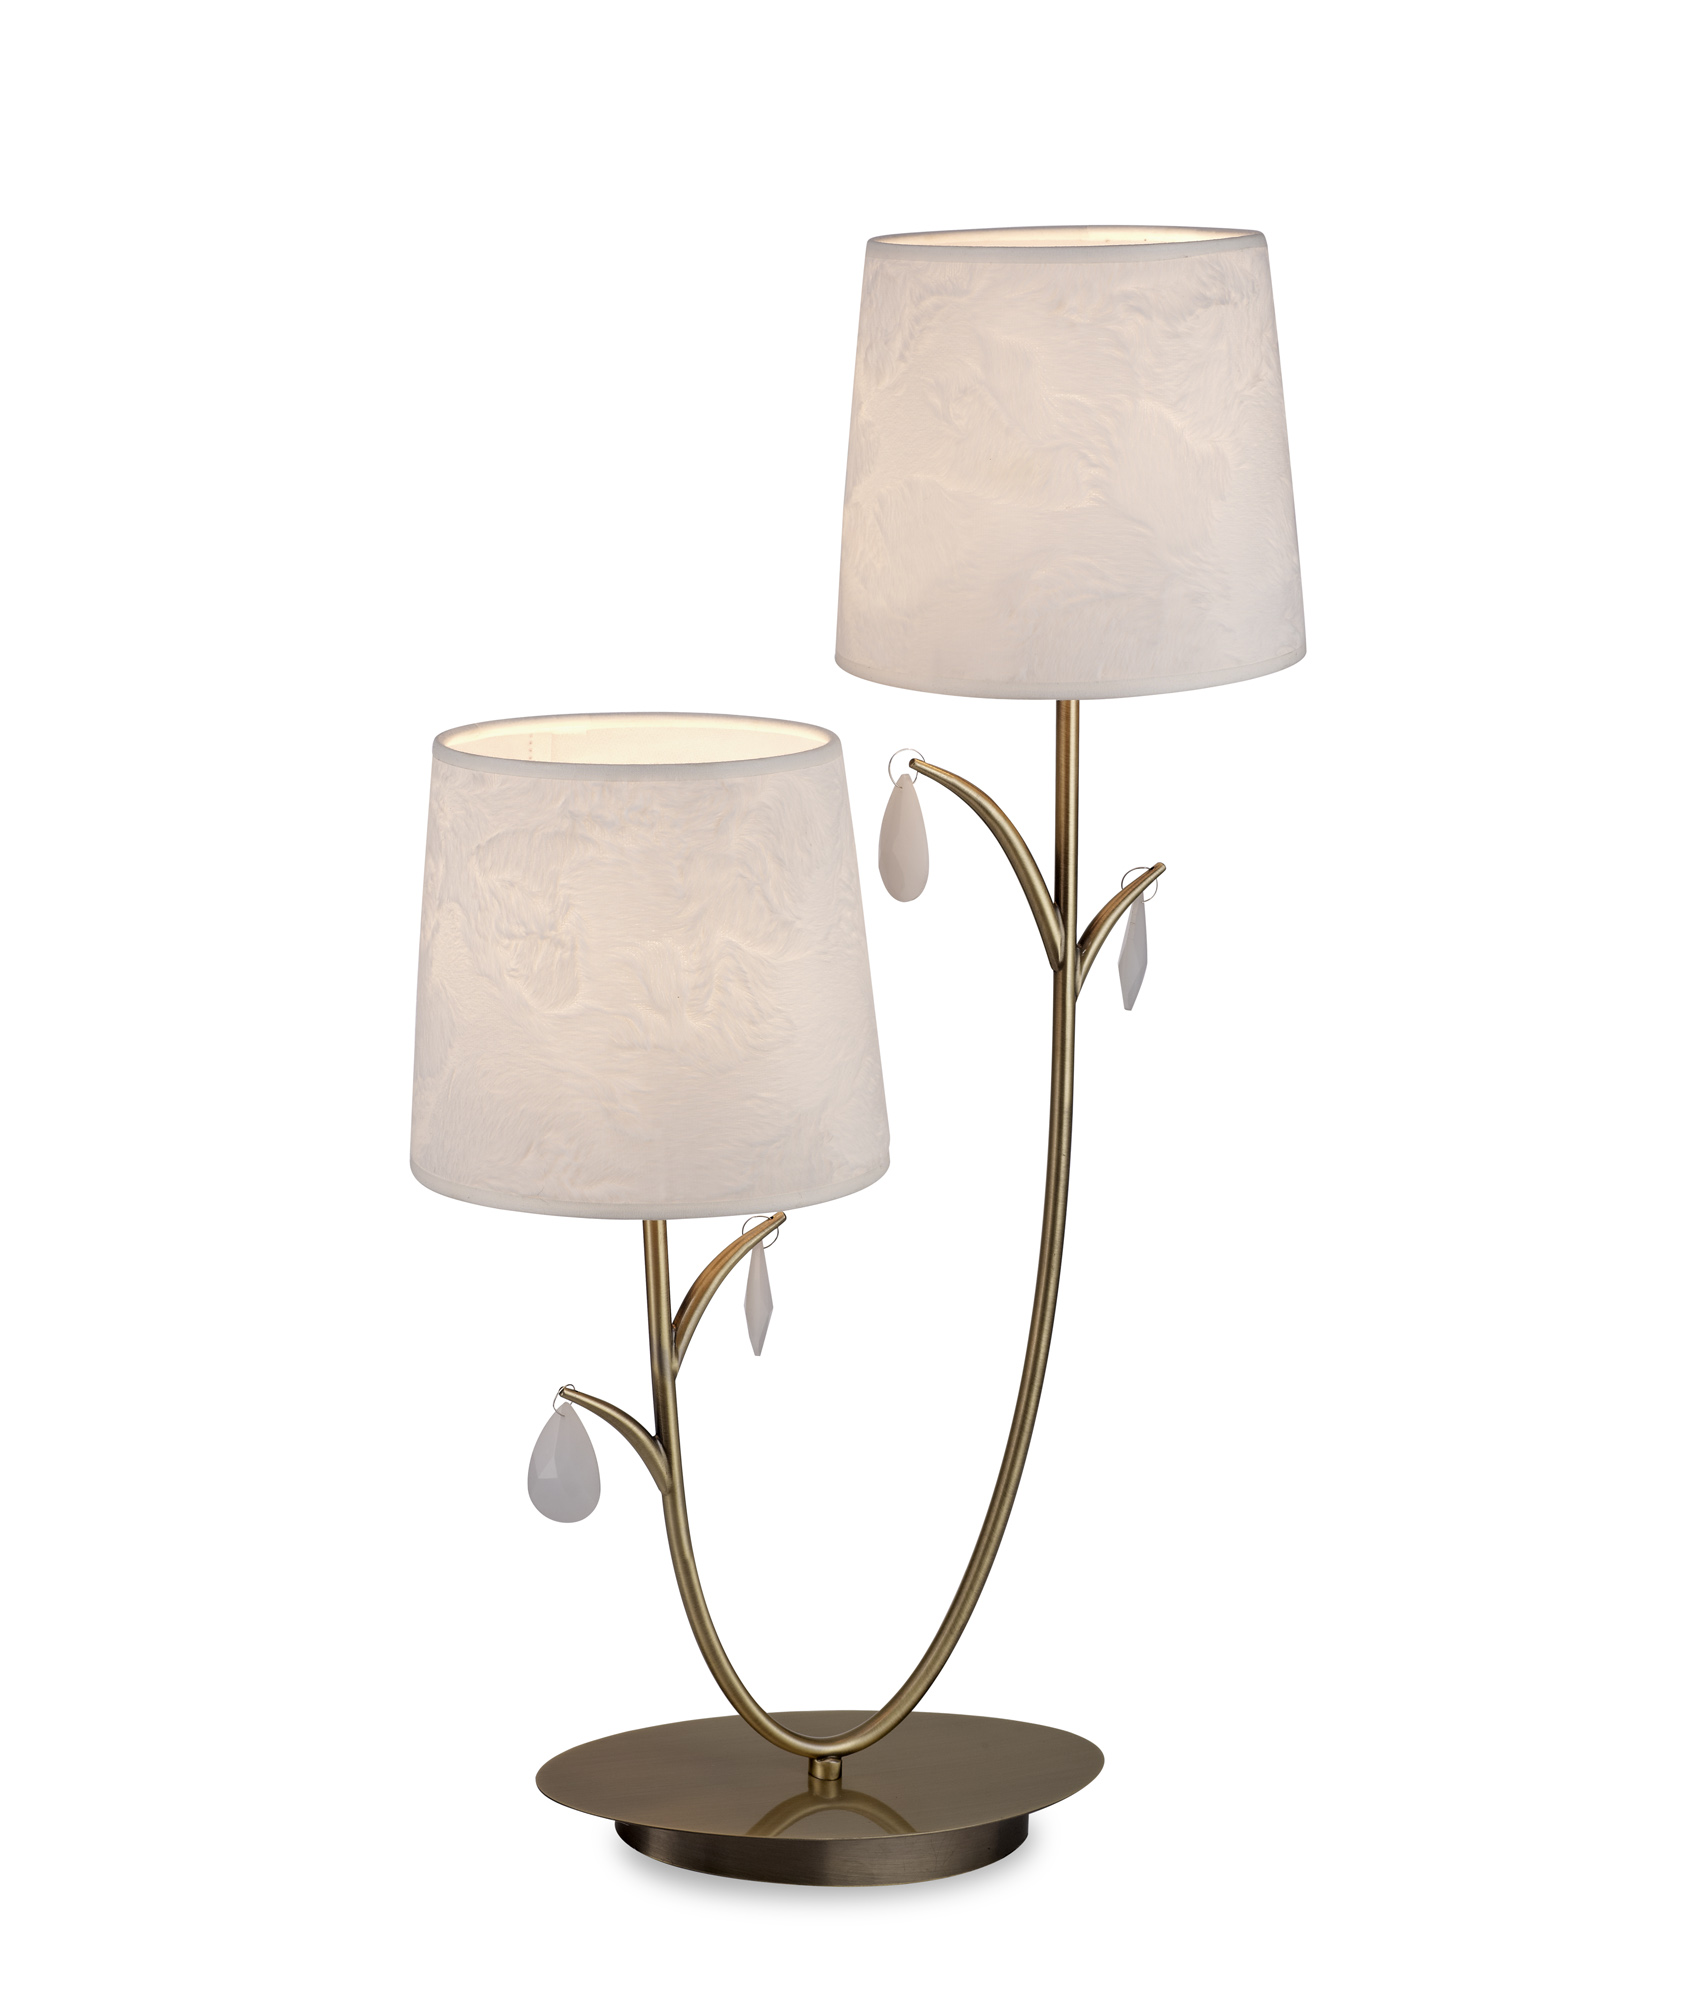 Mantra M6338 Andrea Table Lamp 63cm 2, Table Lamp Shade With Crystal Droplets